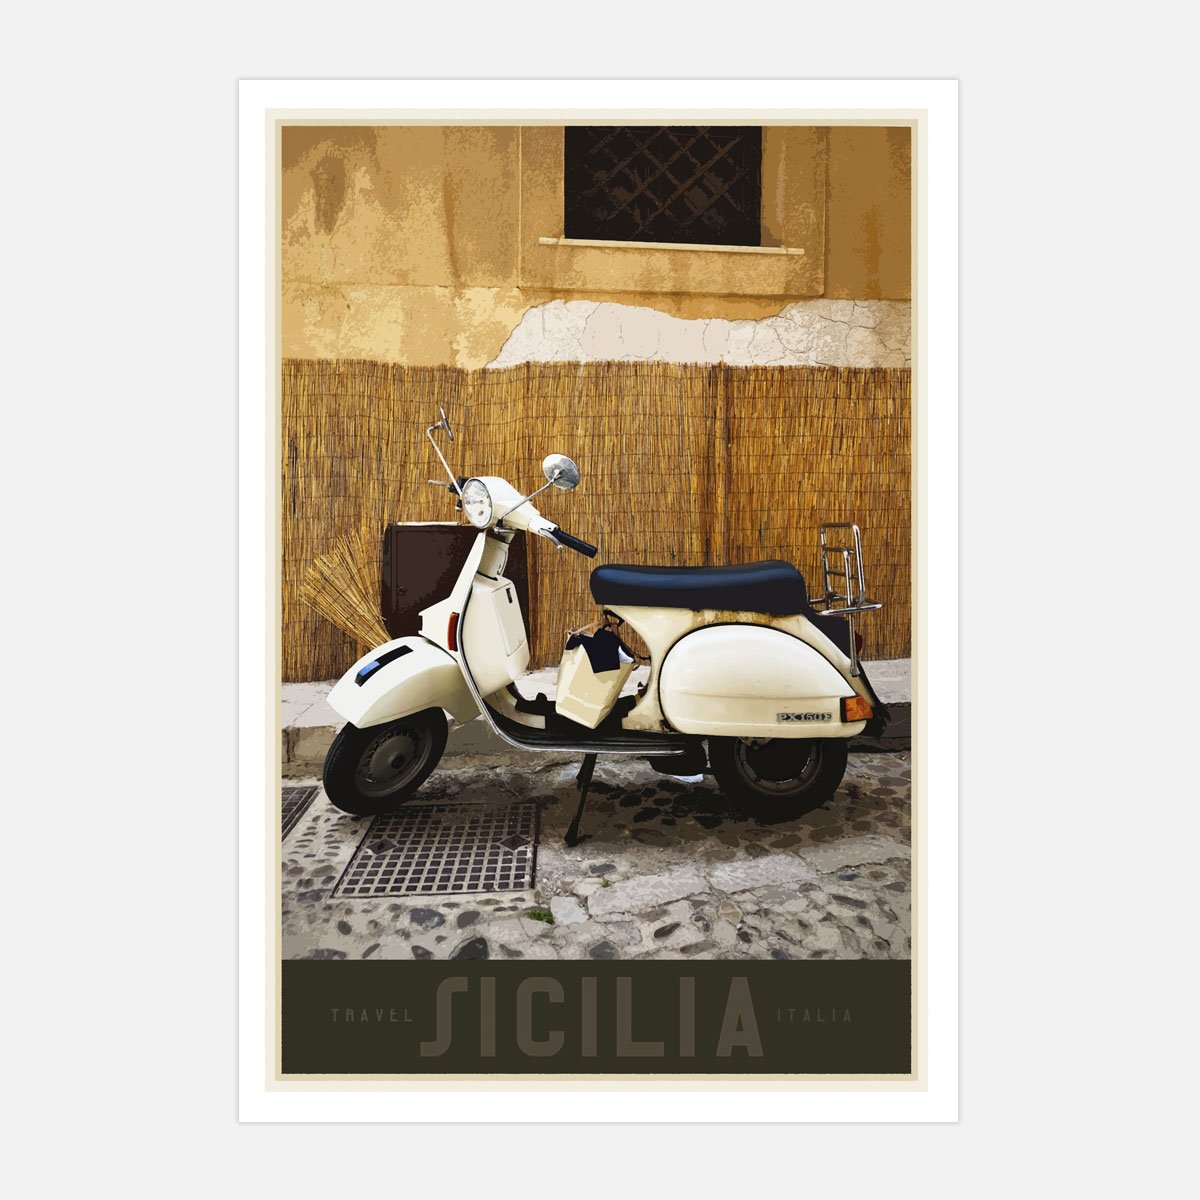 Sicily Vespa vintage travel style poster designed by places we luv